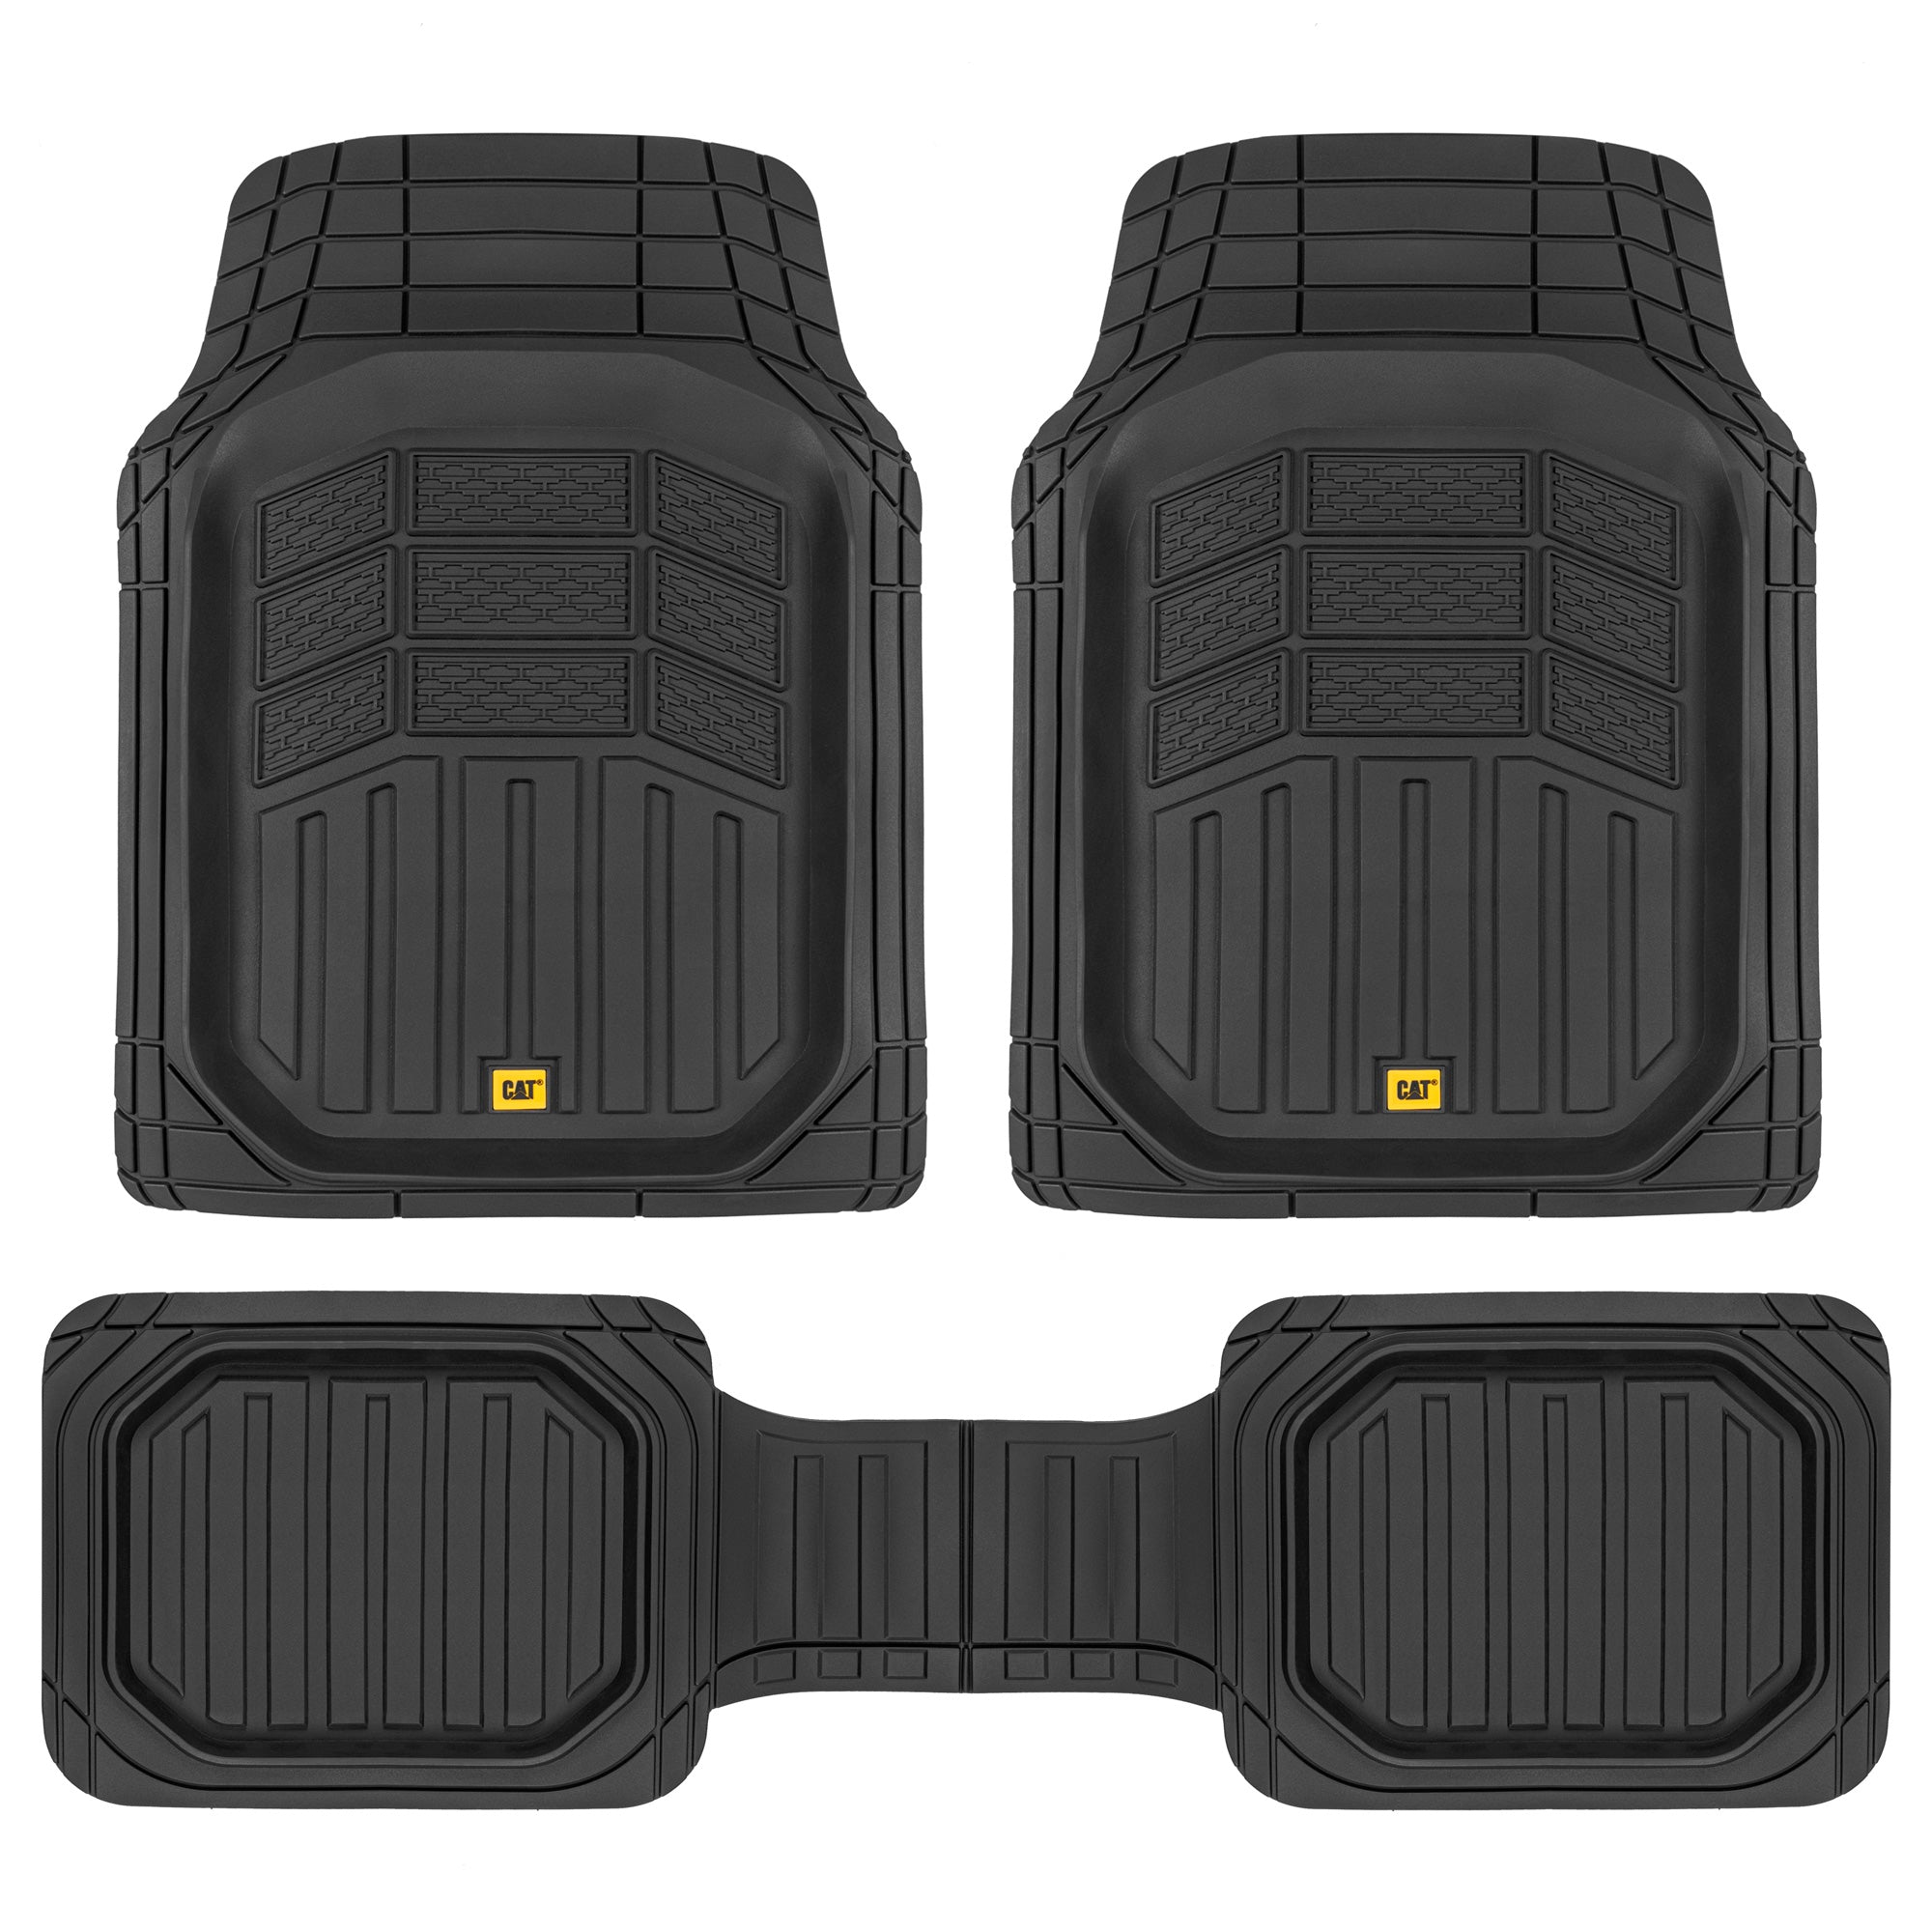 Cat® CAMT-9013 (3-Piece) Heavy Duty Deep Dish Rubber Floor Mats, Trim to Fit for Car Truck SUV & Van, All Weather Total Protection Durable Liners